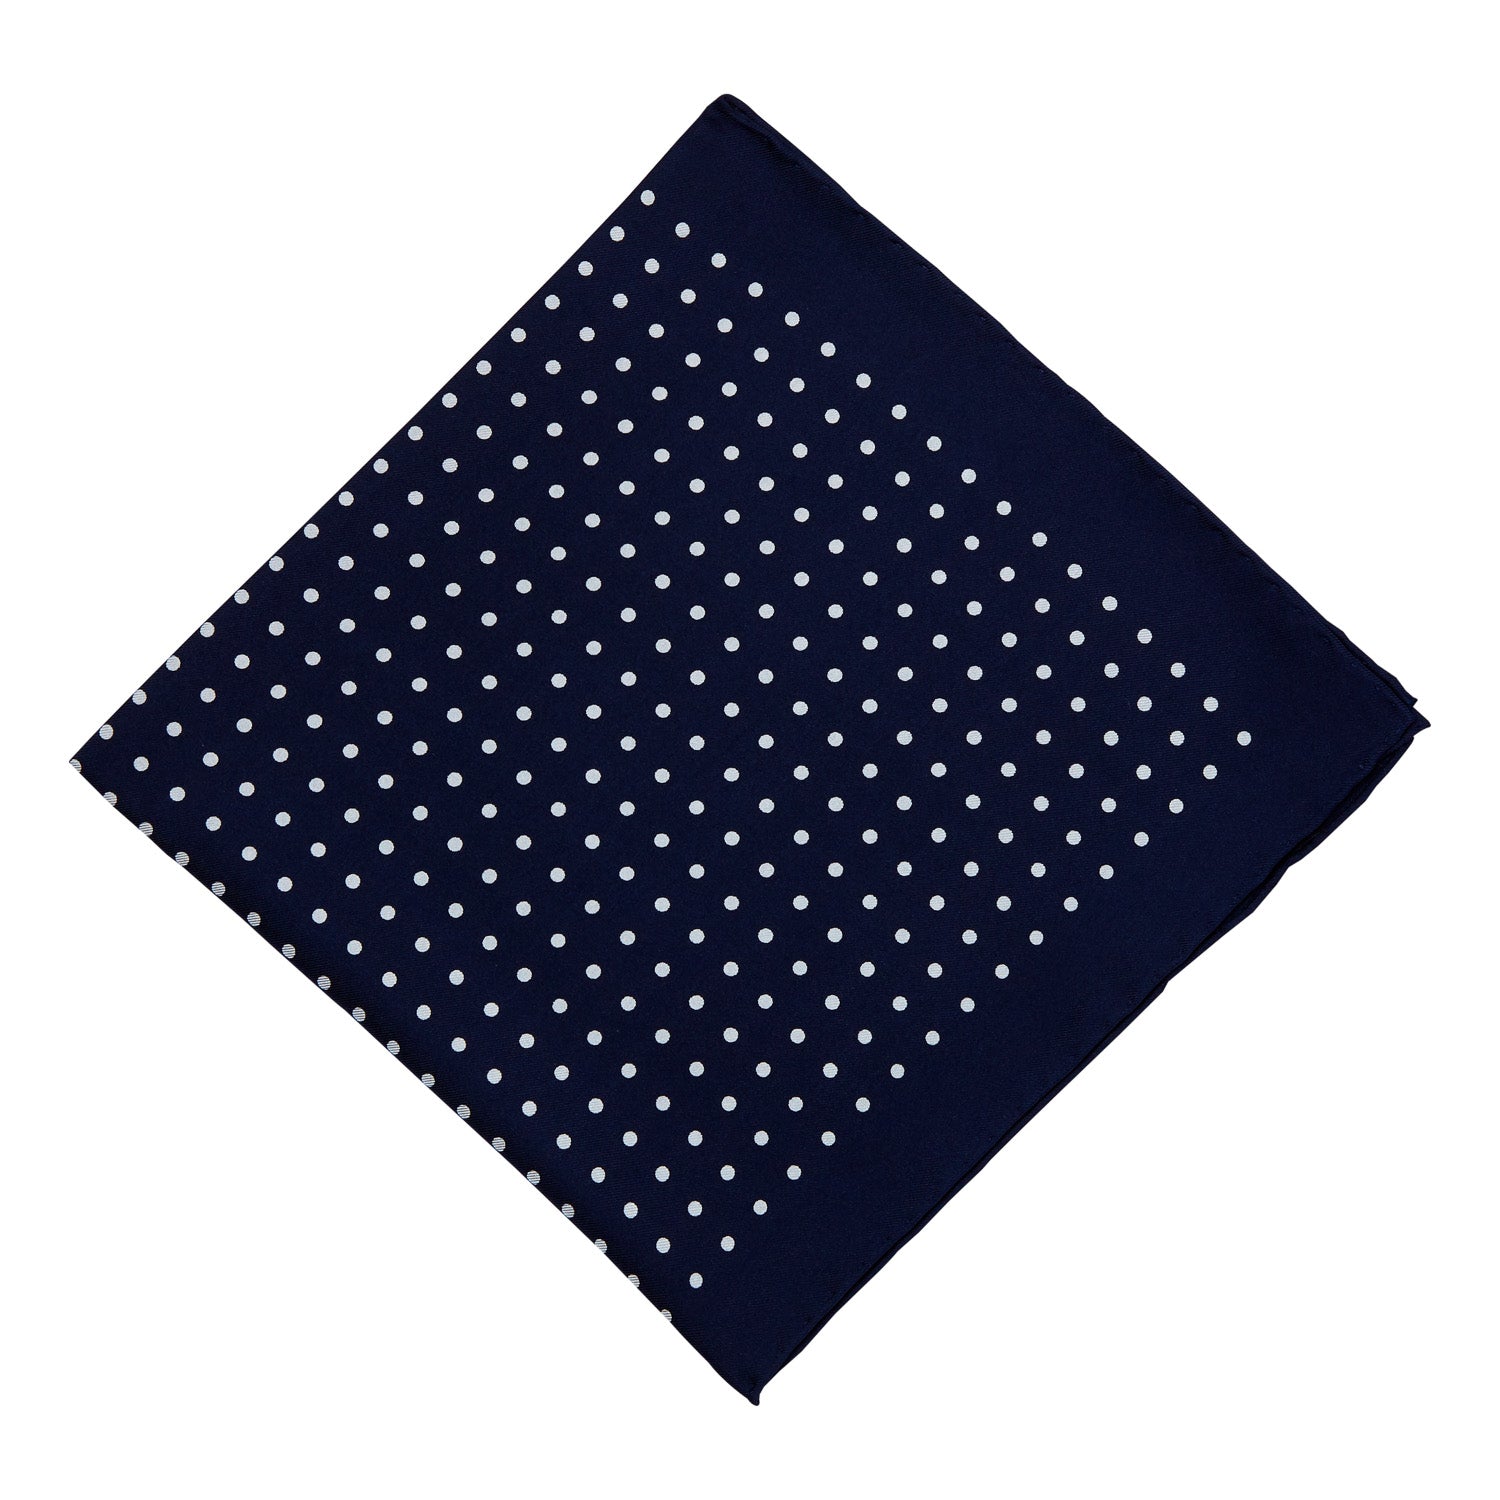 Sovereign Grade 100% Silk Navy London Dot Pocket Square from KirbyAllison.com suitable for formal outfits.